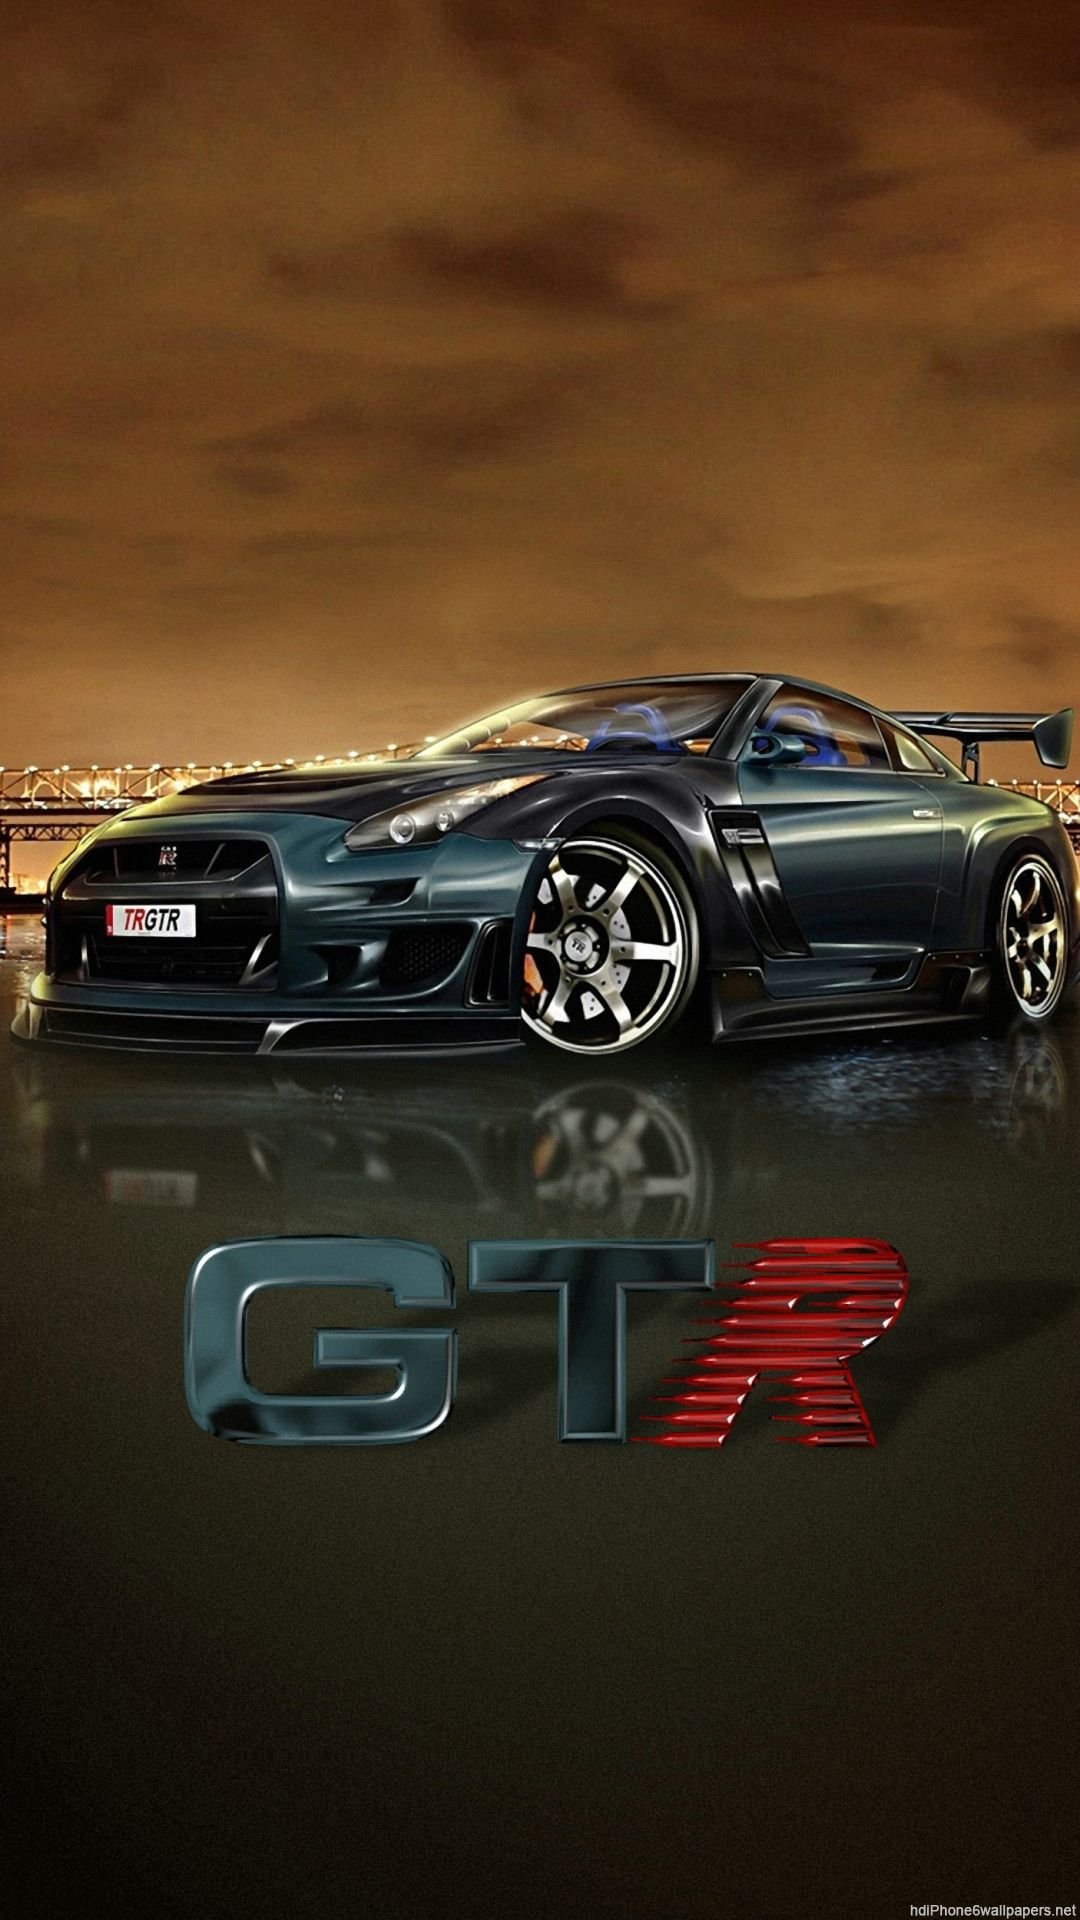 Modern PosterLandscape Nissan GTR Supercar Decor Bedroom Wallpaper HD  Prints Painting Wall Home Furnishing23.6x31.5 in(60x80cm) no frame :  Amazon.ca: Home